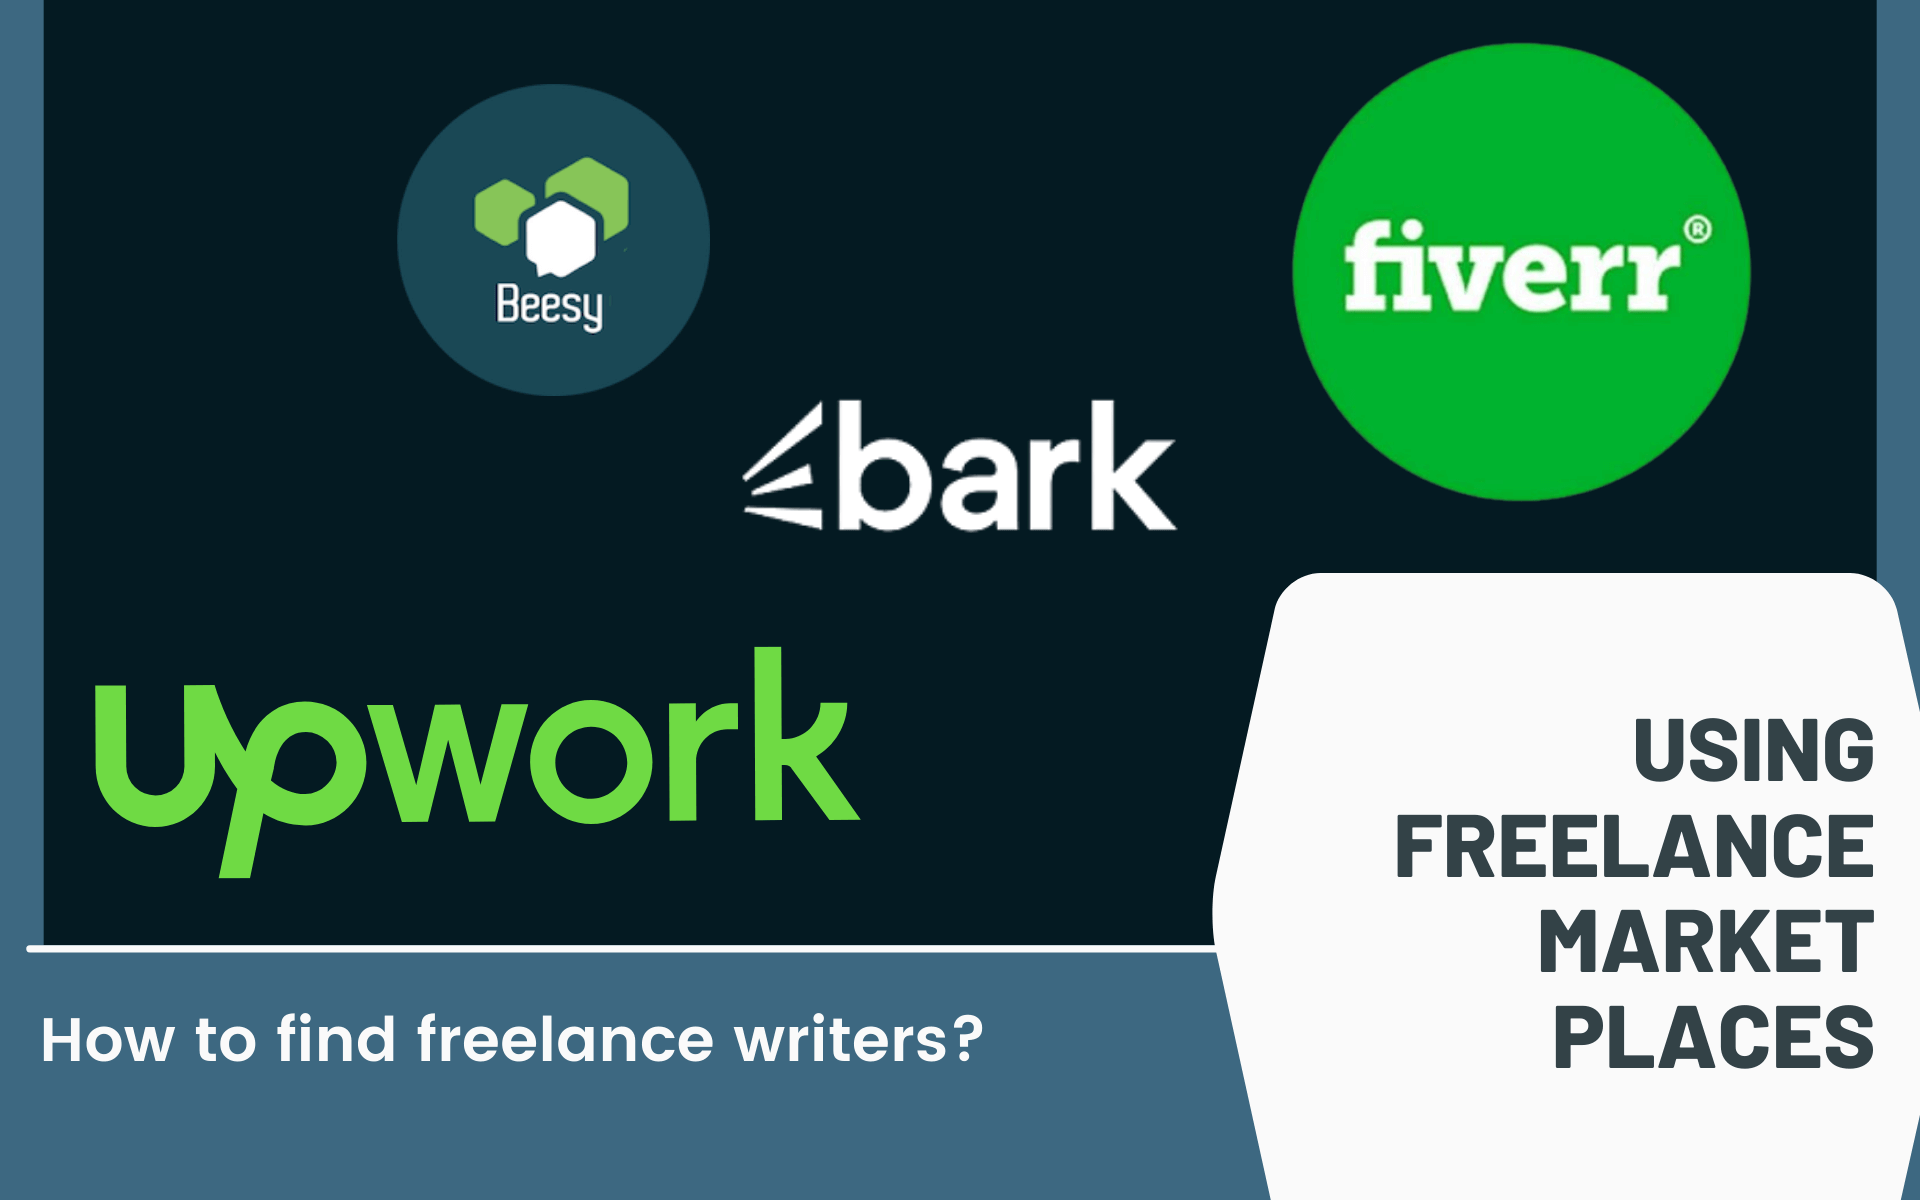 Using Freelance Market places Content Writing 101